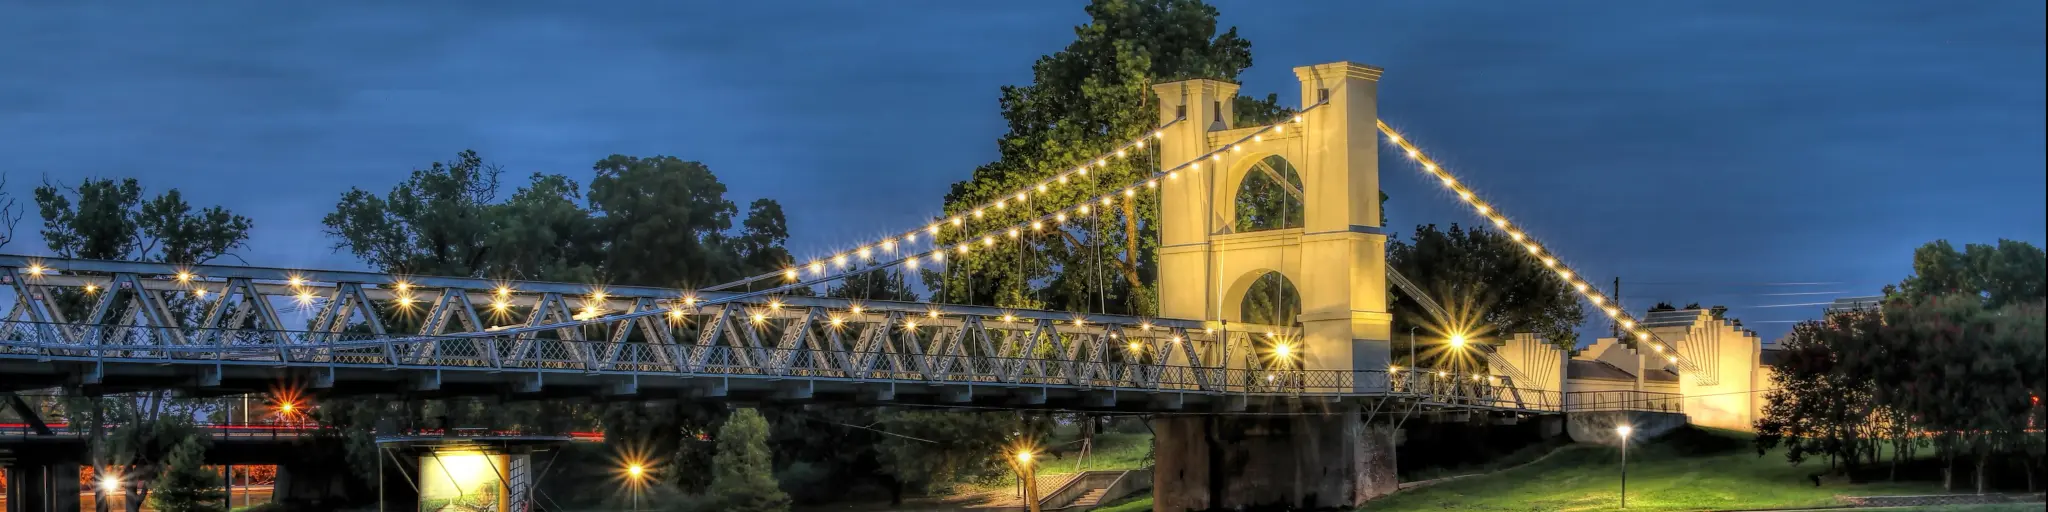 The historic Waco suspension bridge, built in 1870 and located in Indian spring park on the Brazos River.